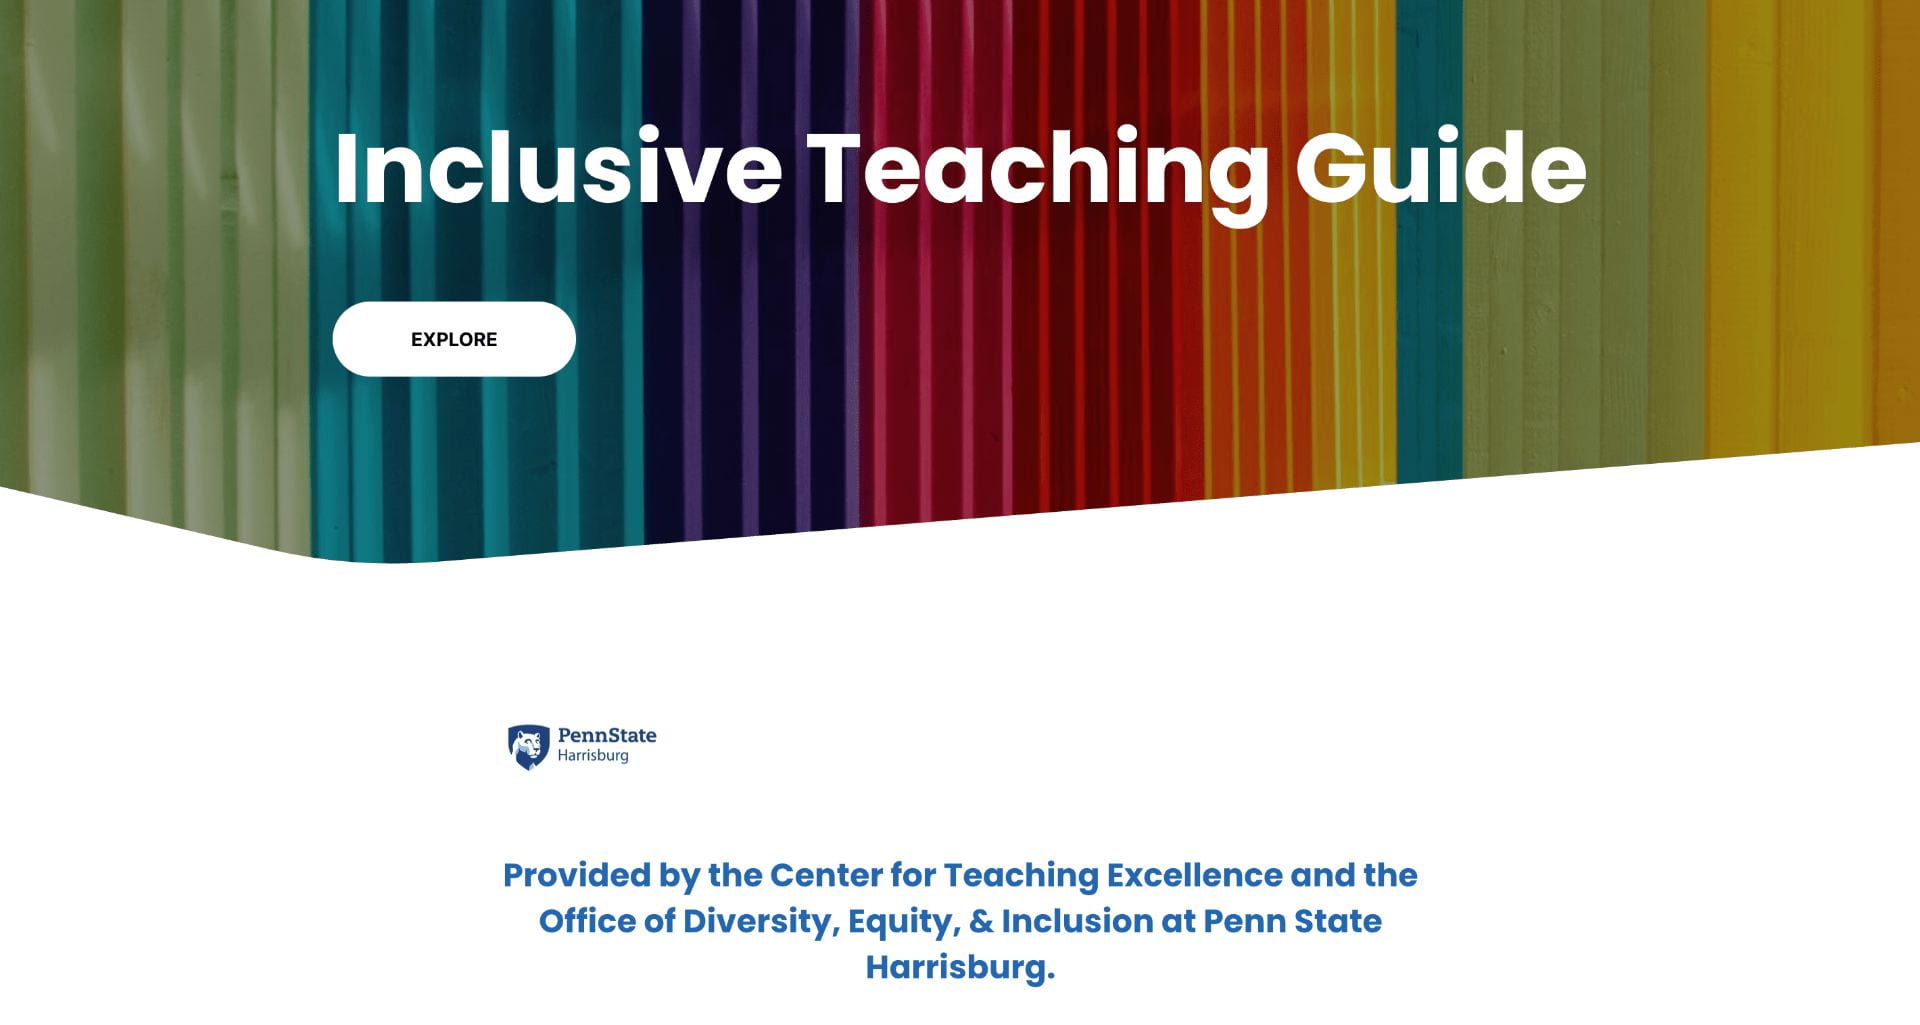 A screenshot of the Inclusive Teaching Guide home page.